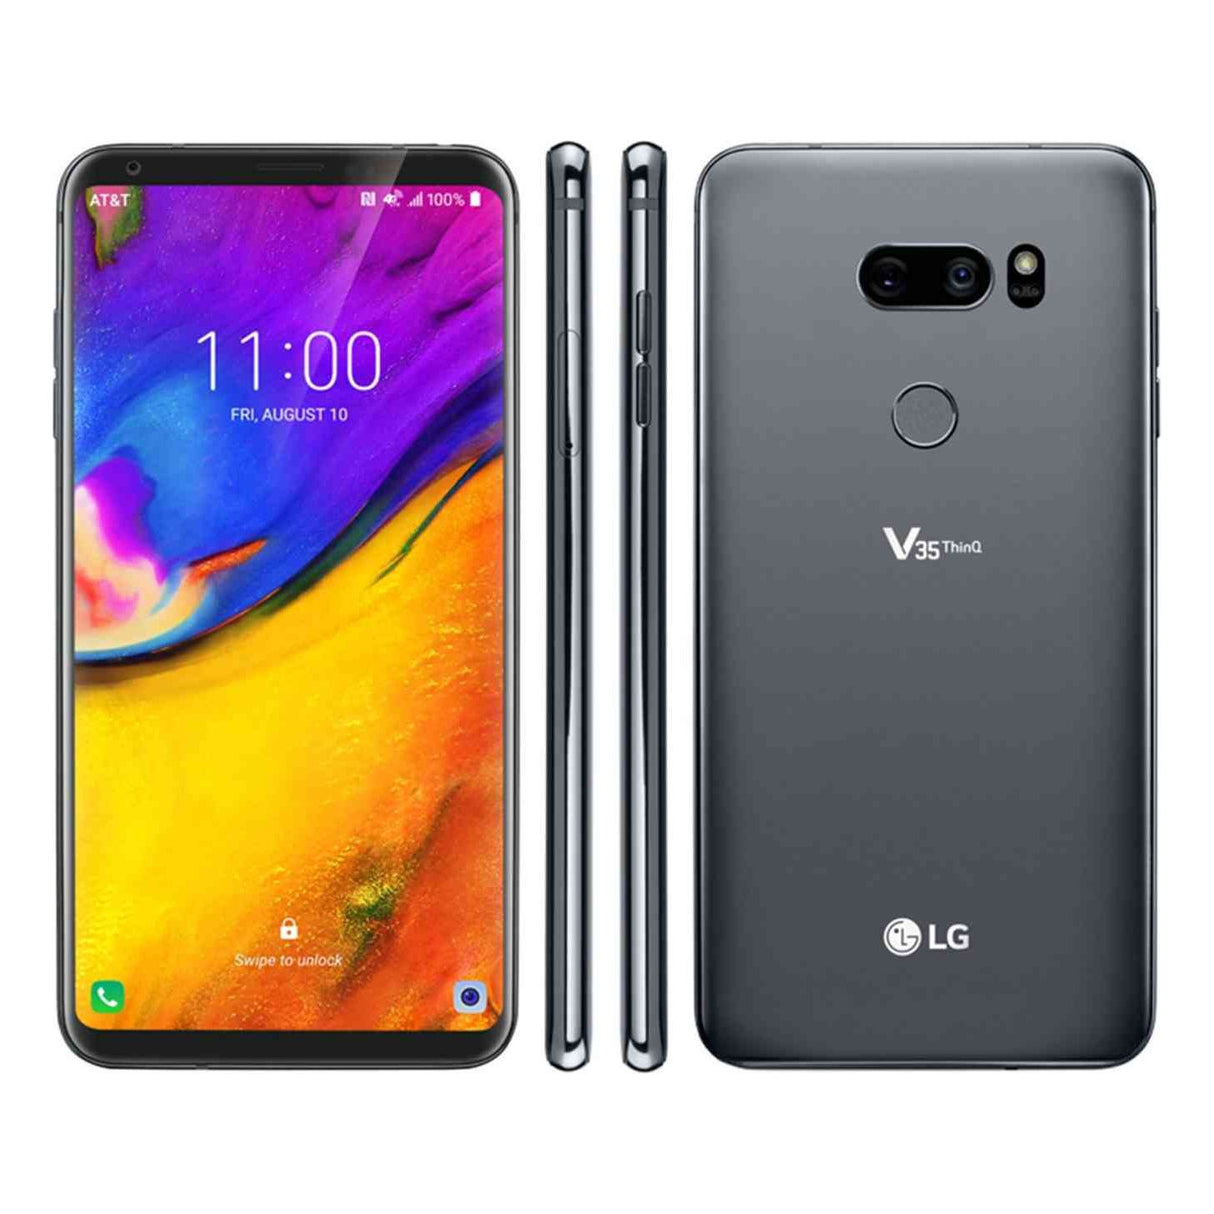 LG V35 ThinQ LM-V350A 64GB AT&T Branded Smartphone